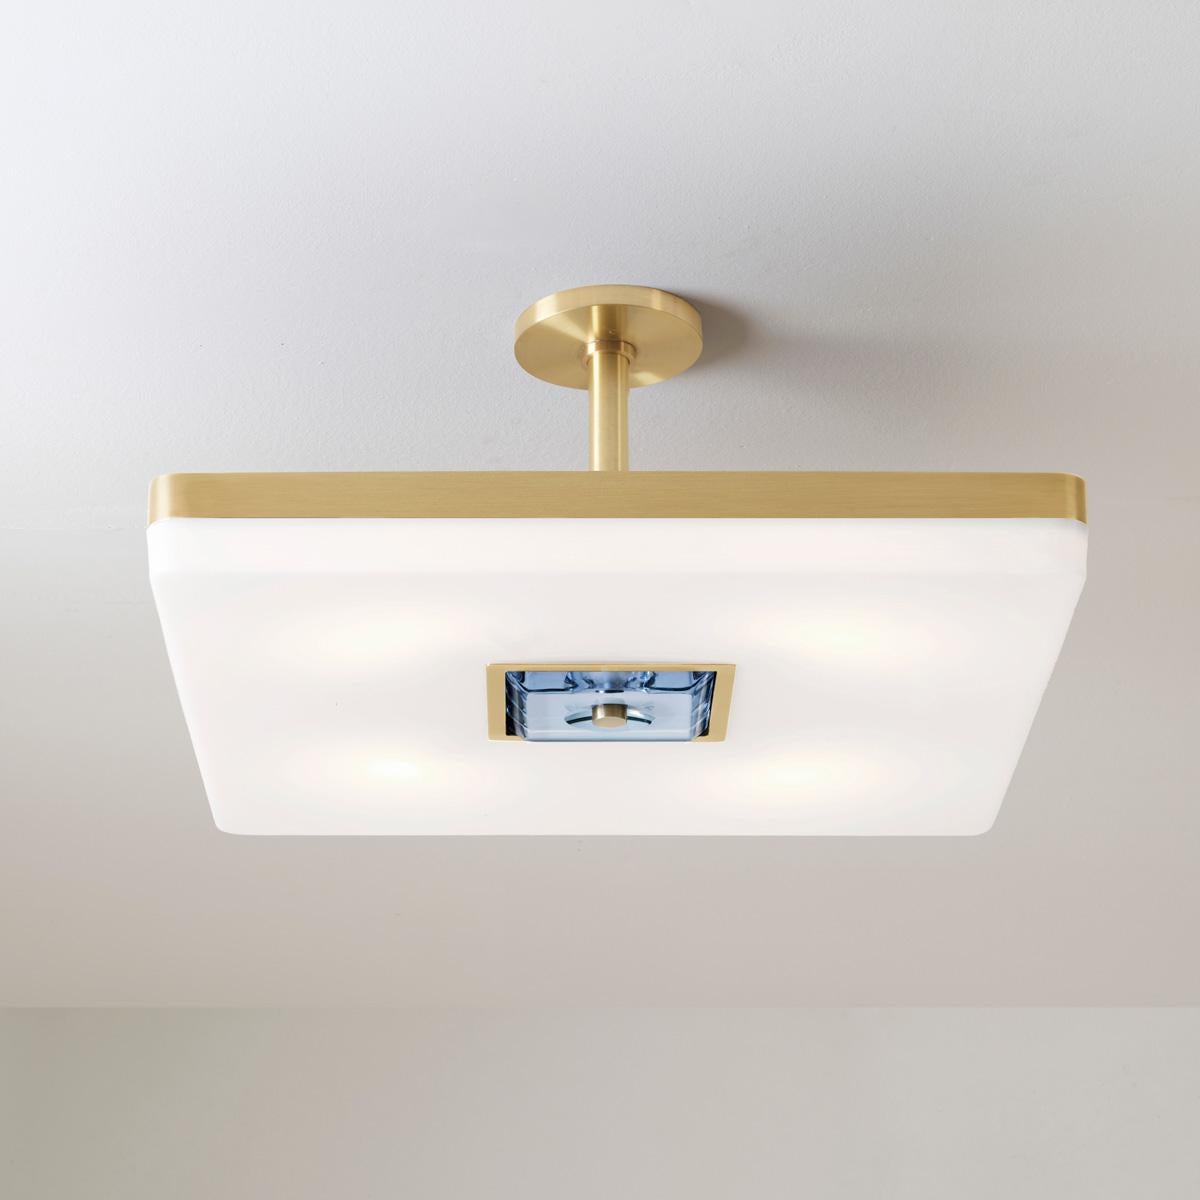 Iris Square Ceiling Light by Gaspare Asaro. Bronze Finish For Sale 1